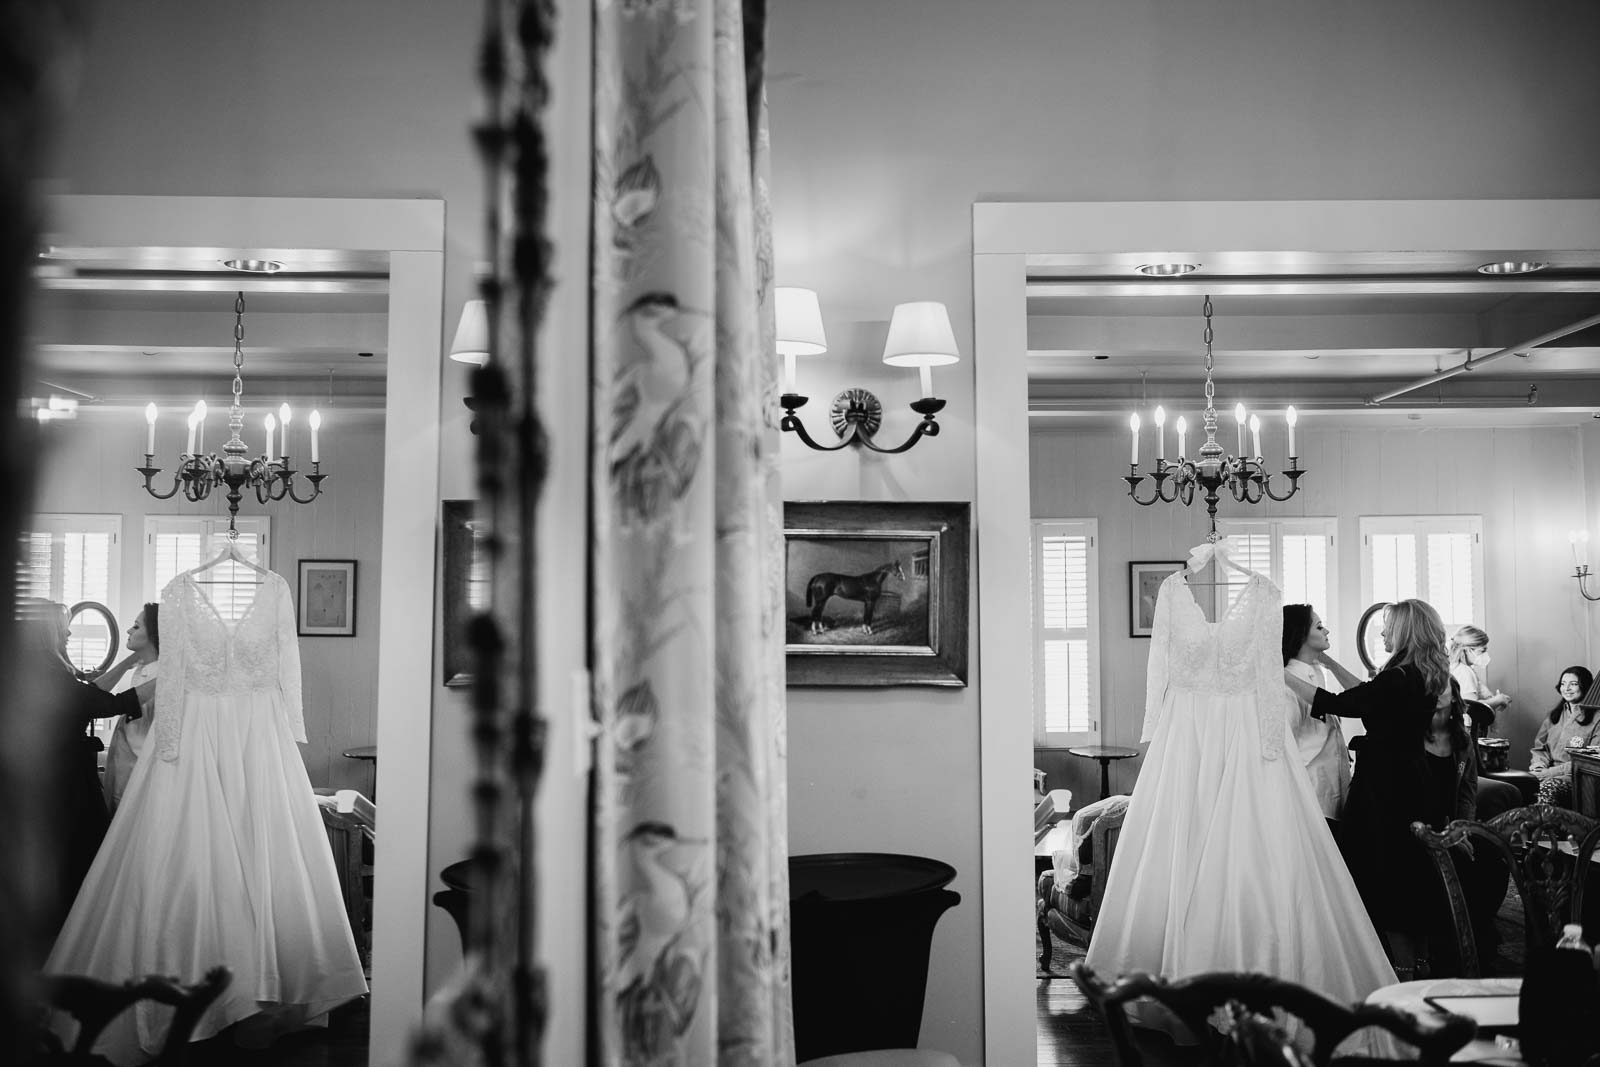 In a mirror reflection the bride stress hangs wildly wildly mother of the bride talks to her daughter